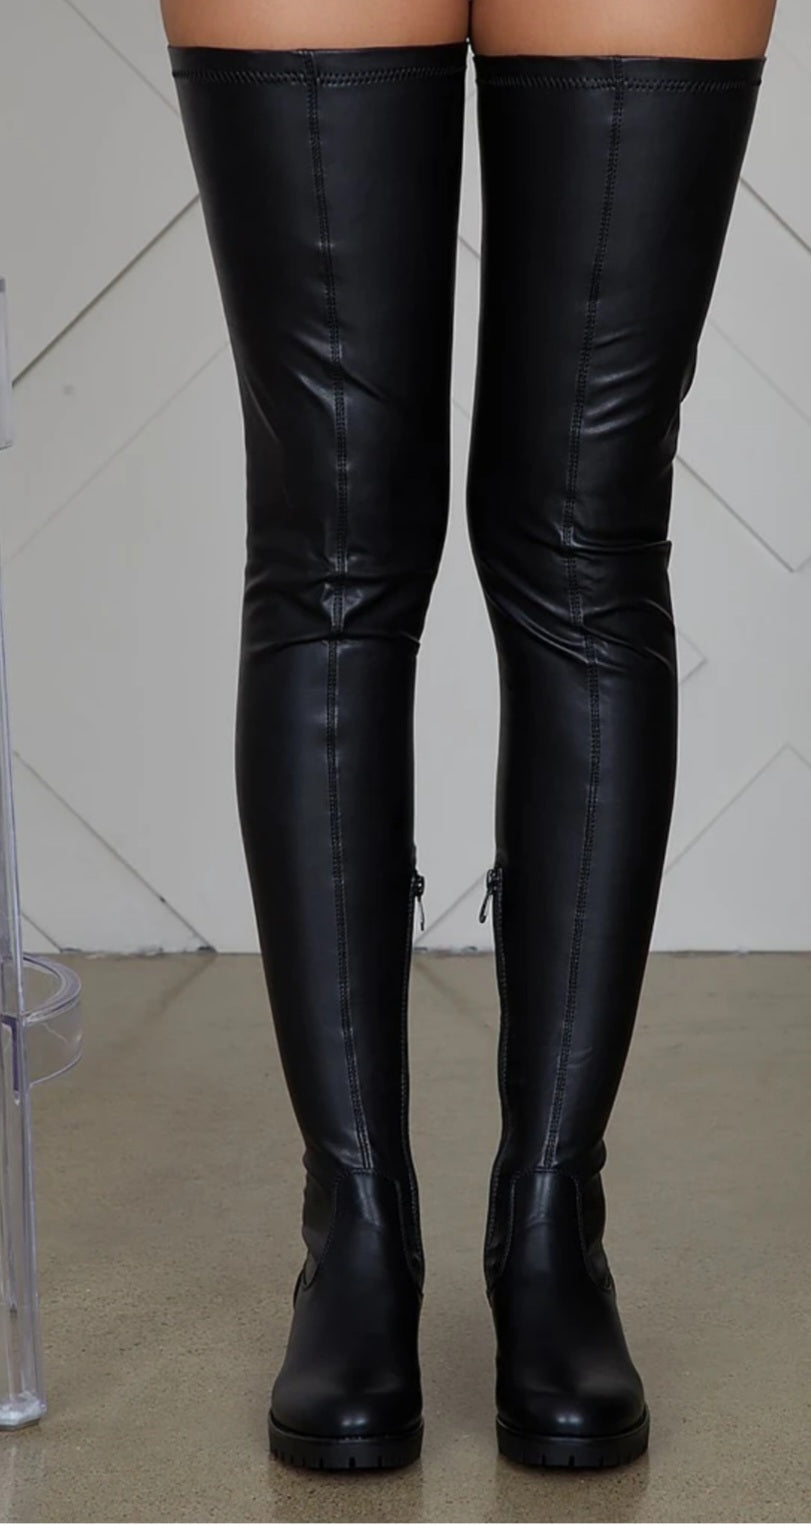 Surgical Thigh High Boots ( Pre-Order)